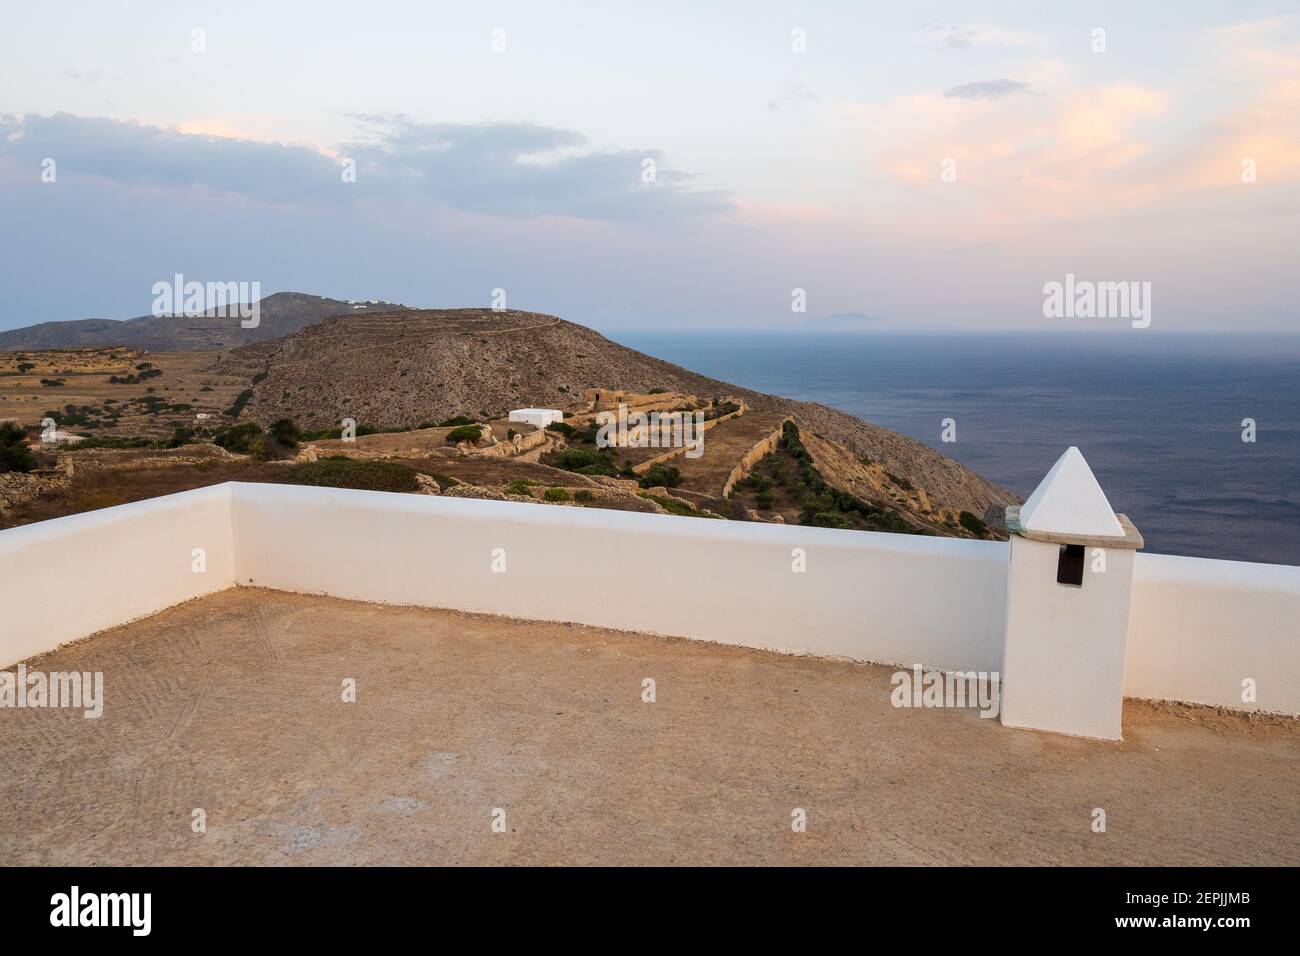 White terrace overlooking the Aegean Sea in Folegandros Island, Cyclades, Greece Stock Photo